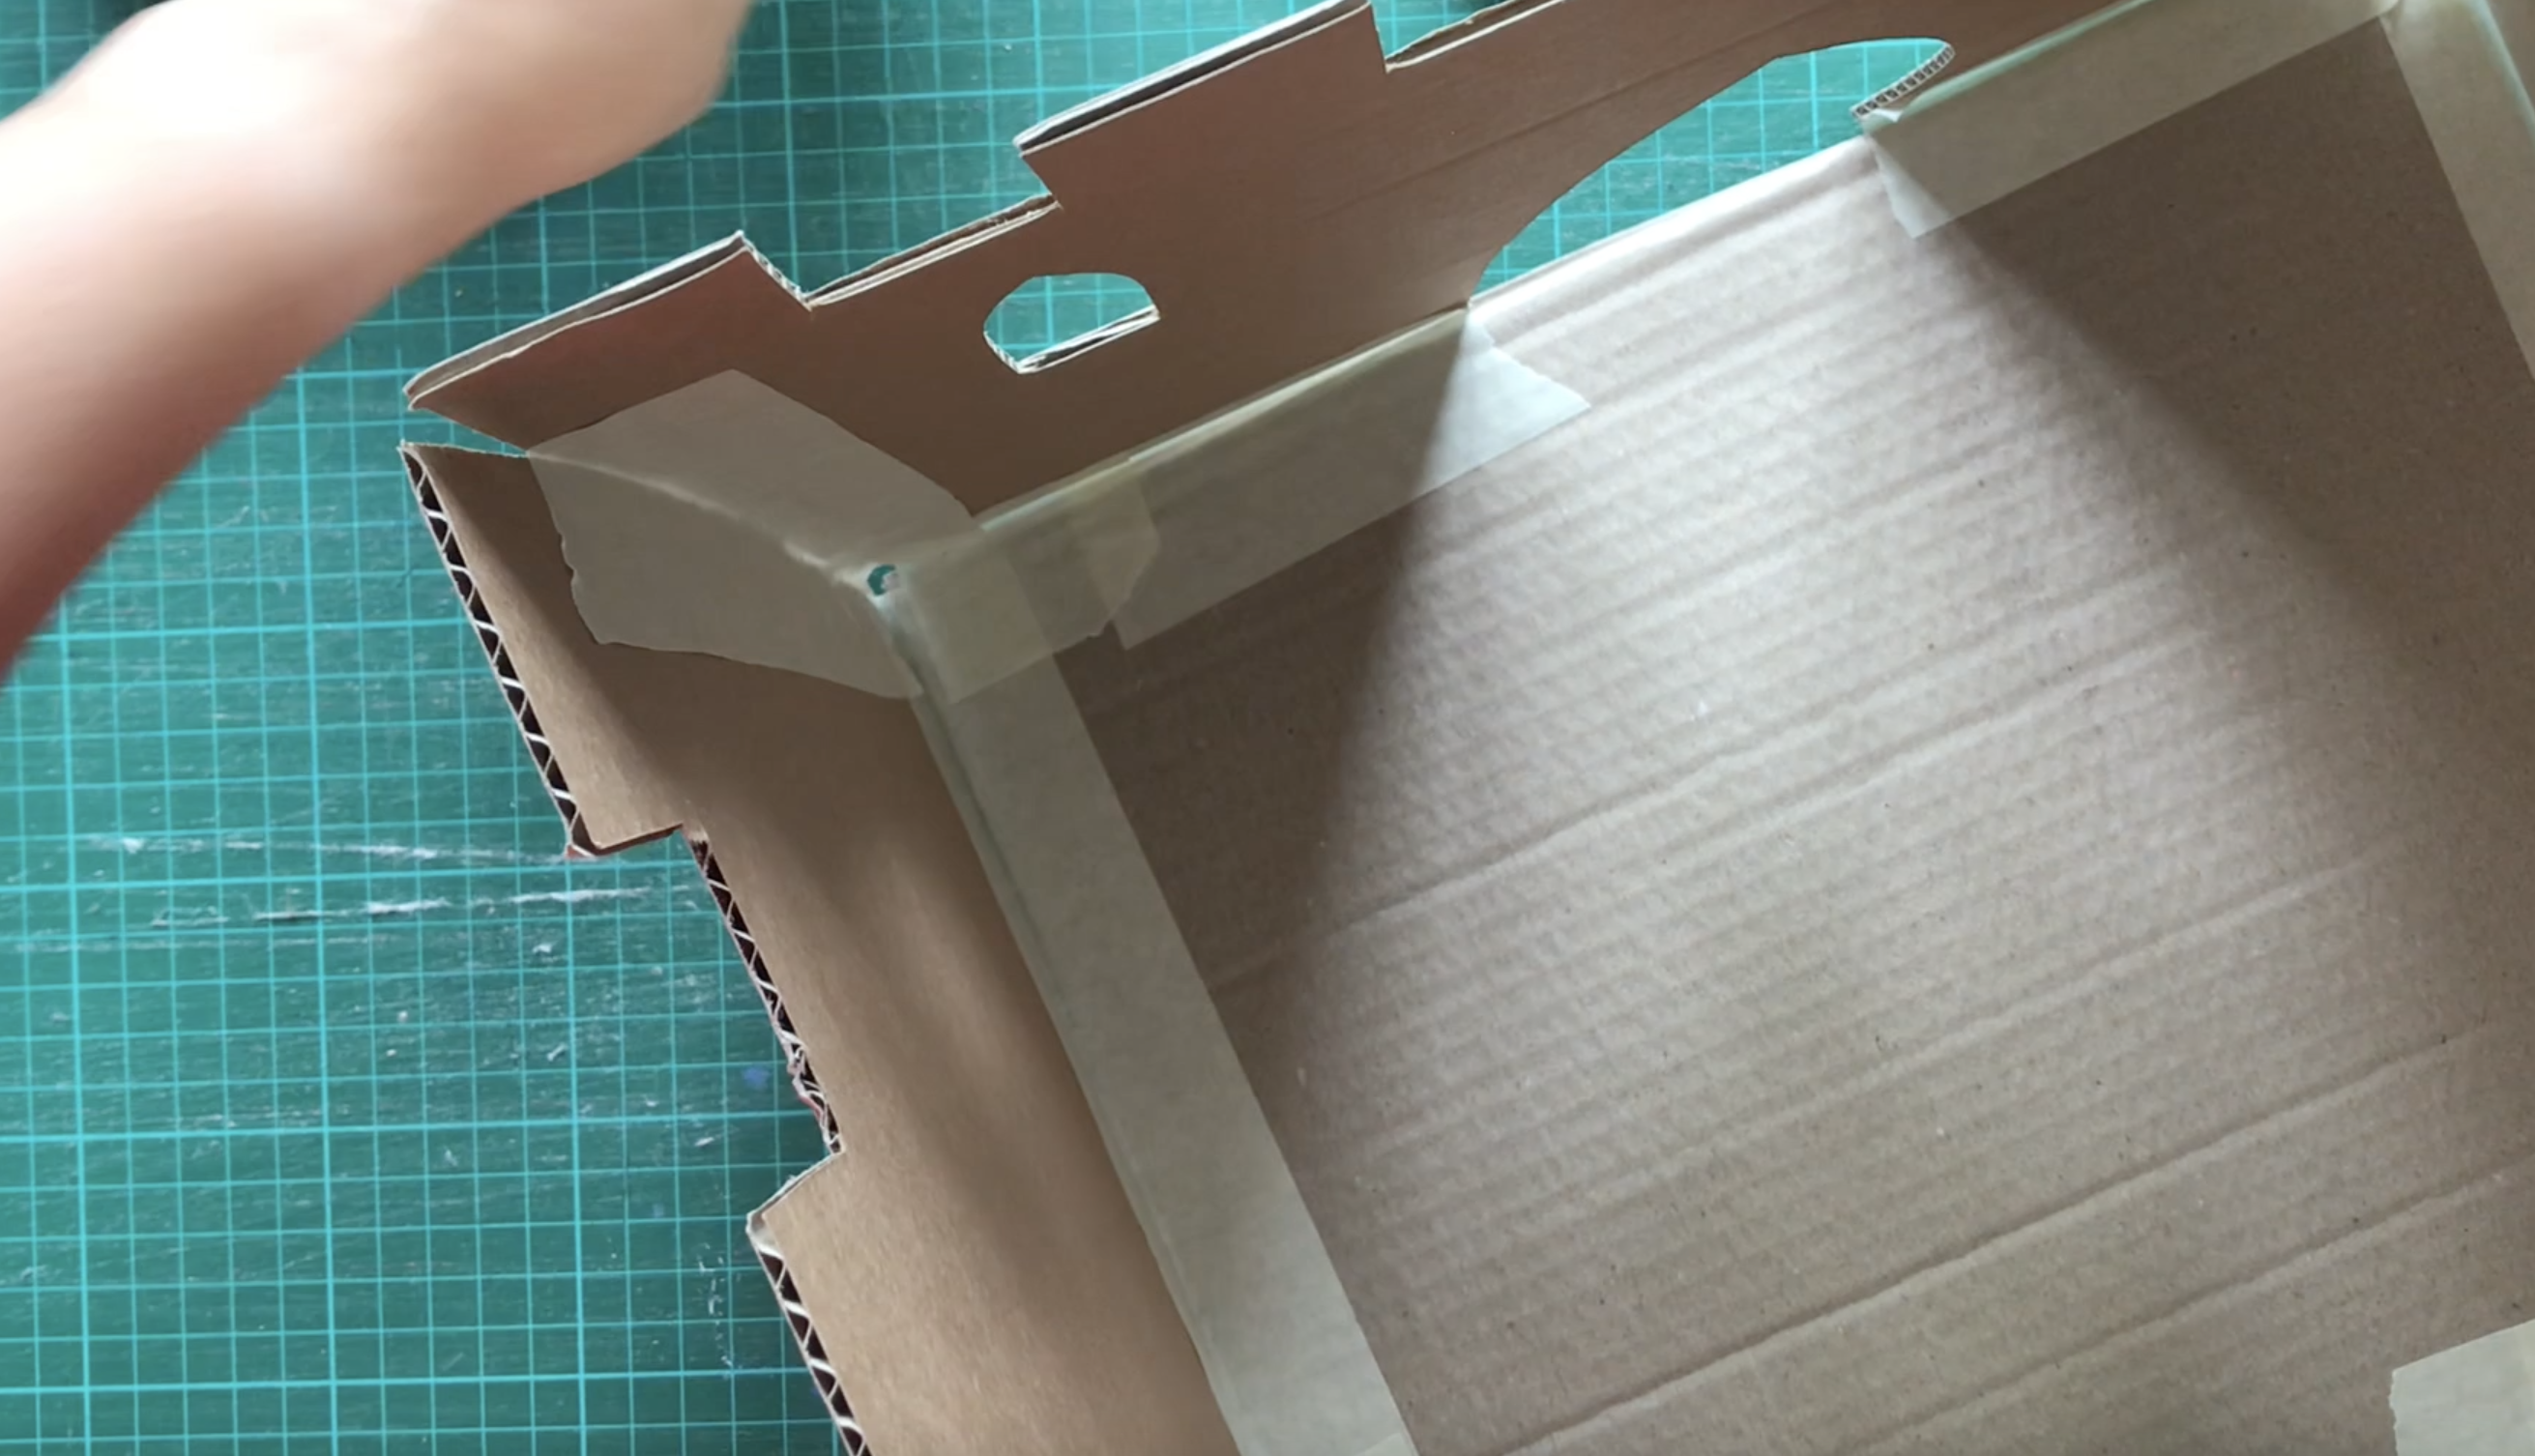 How to make a castle out of cardboard step 6 assemble